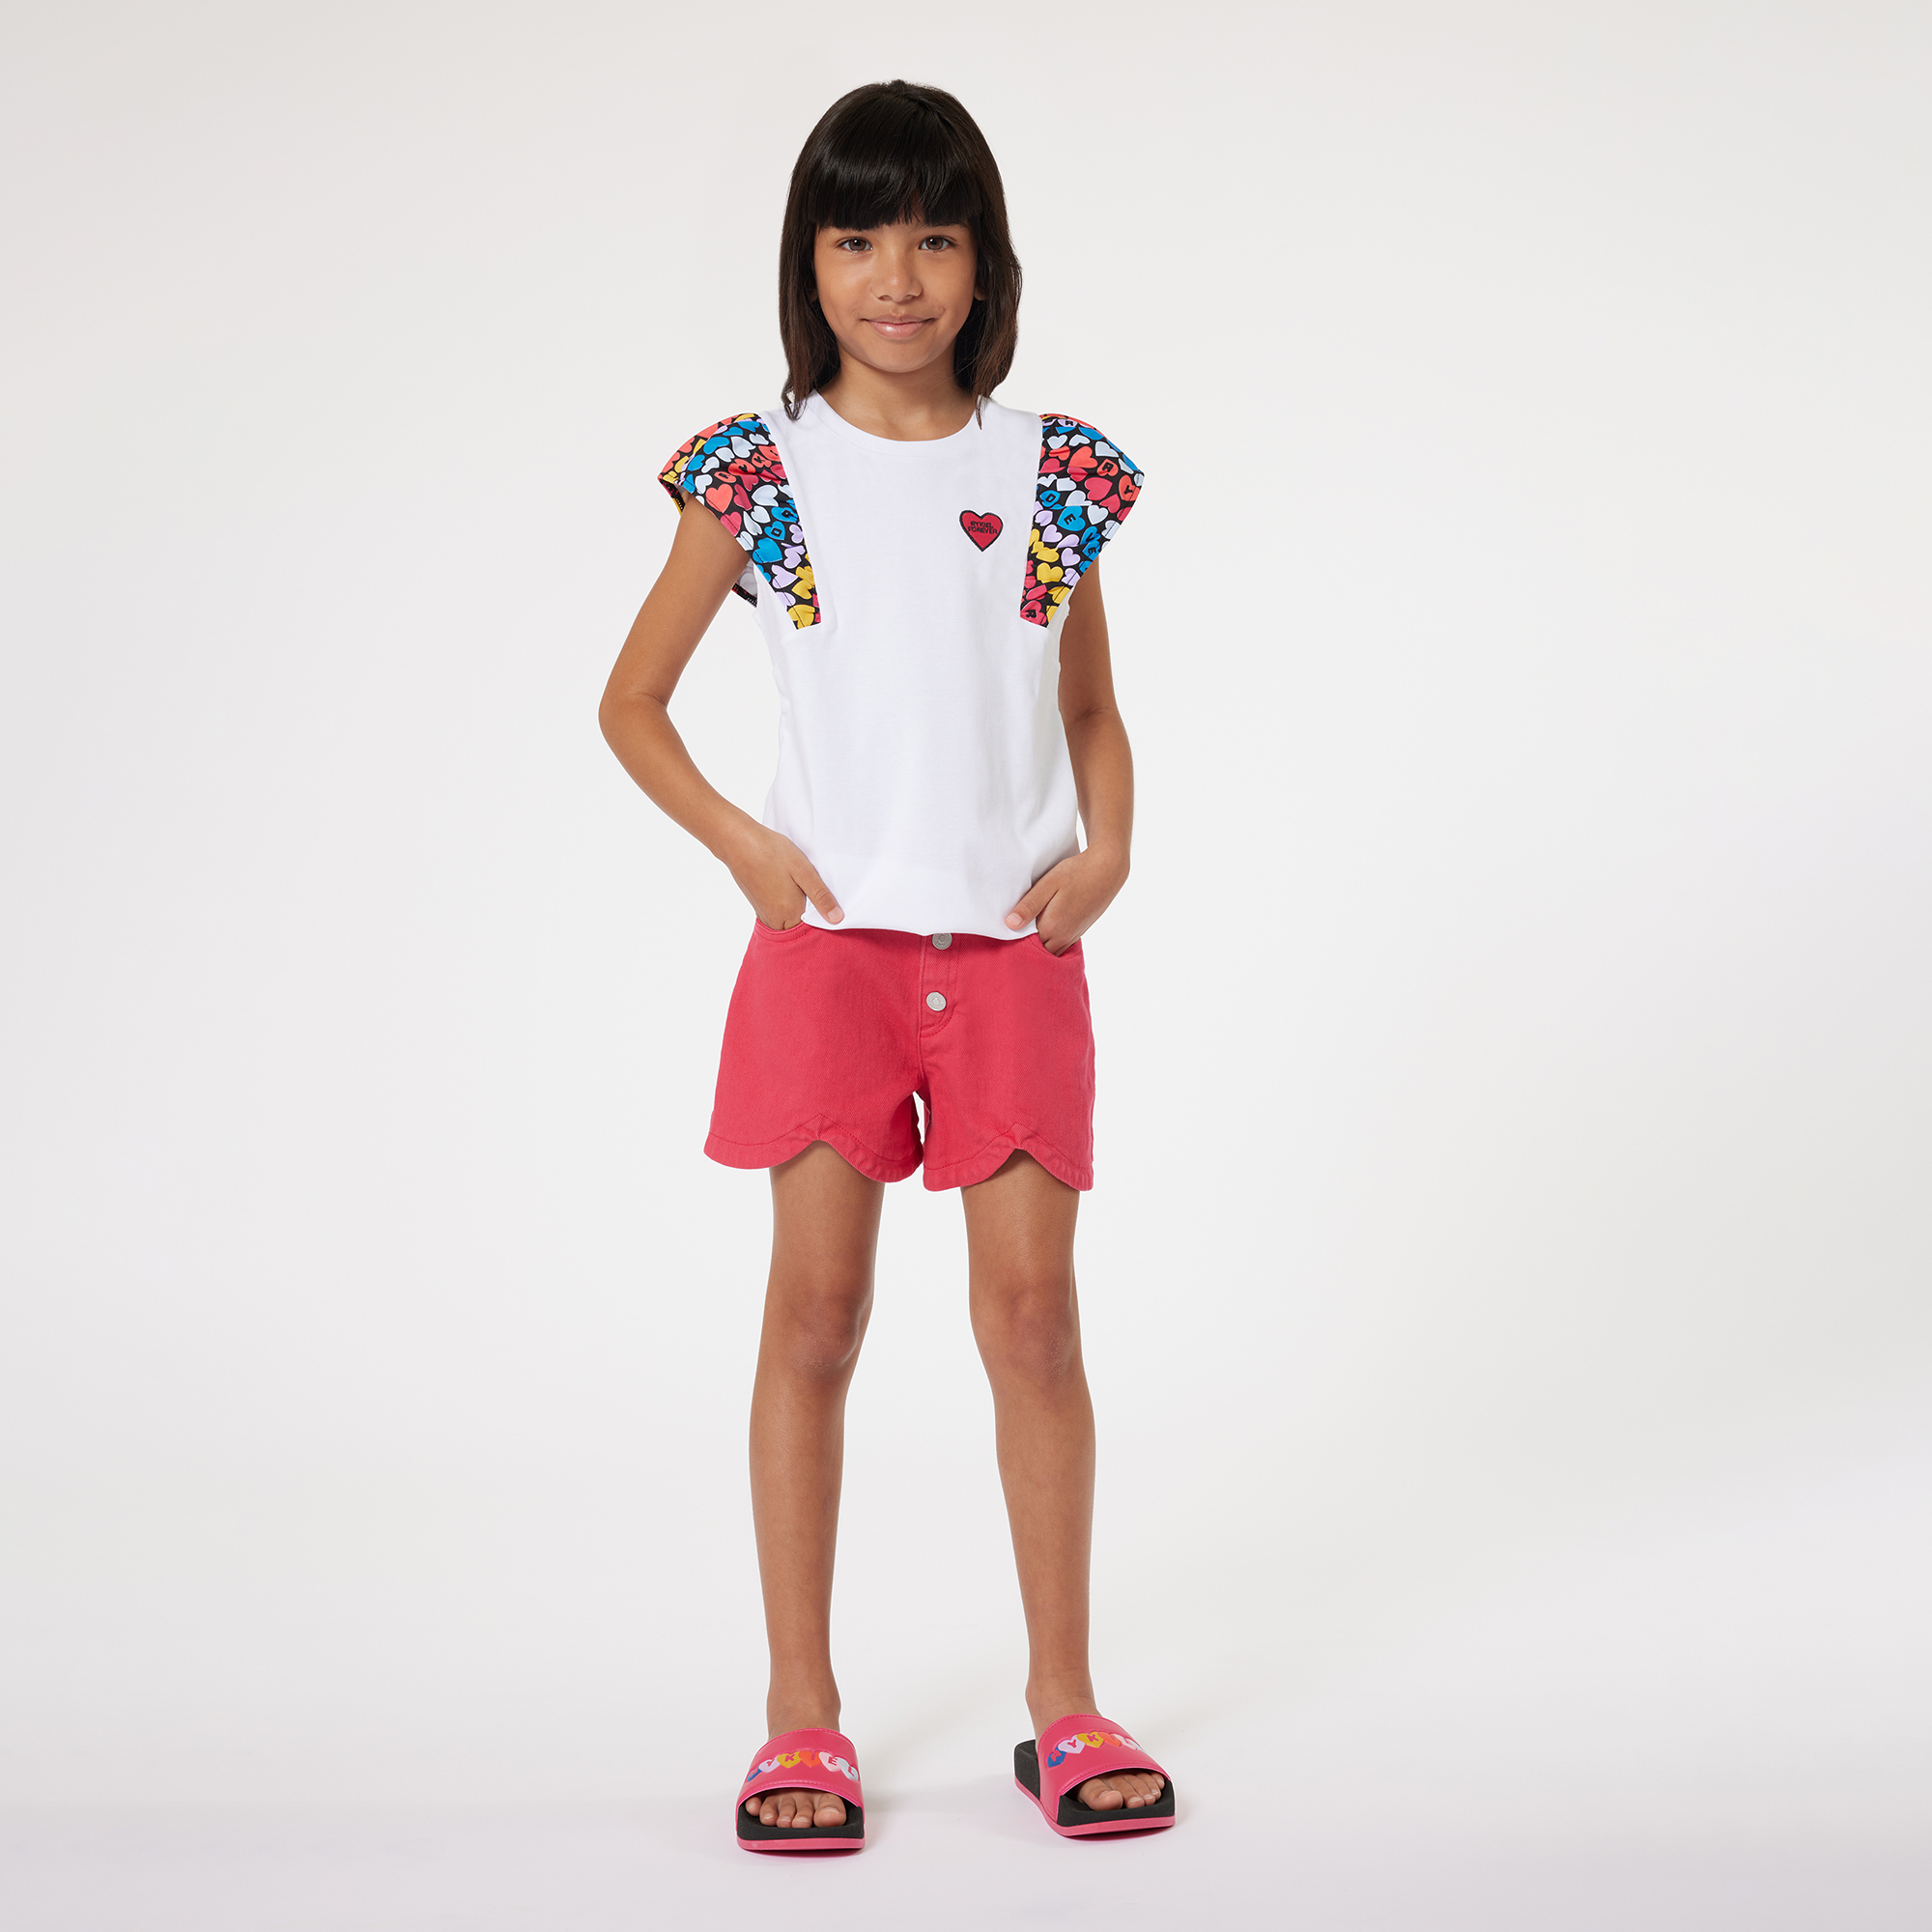 Shorts with logo buttons SONIA RYKIEL for GIRL